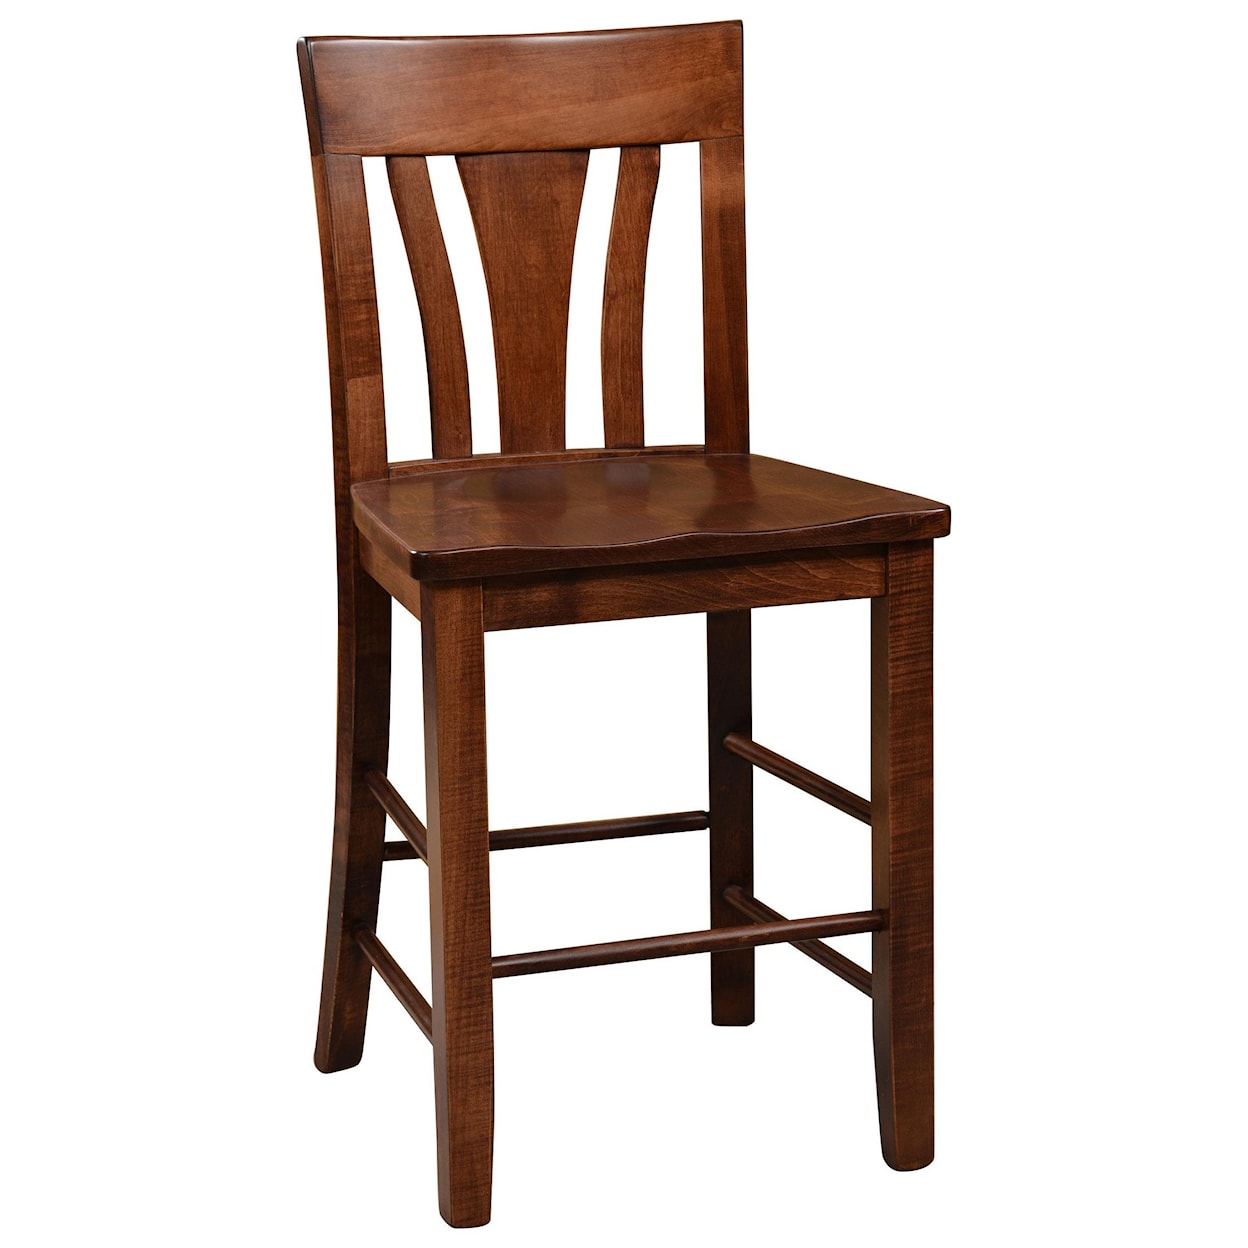 Wengerd Wood Products Mentor 24" Stationary Stool